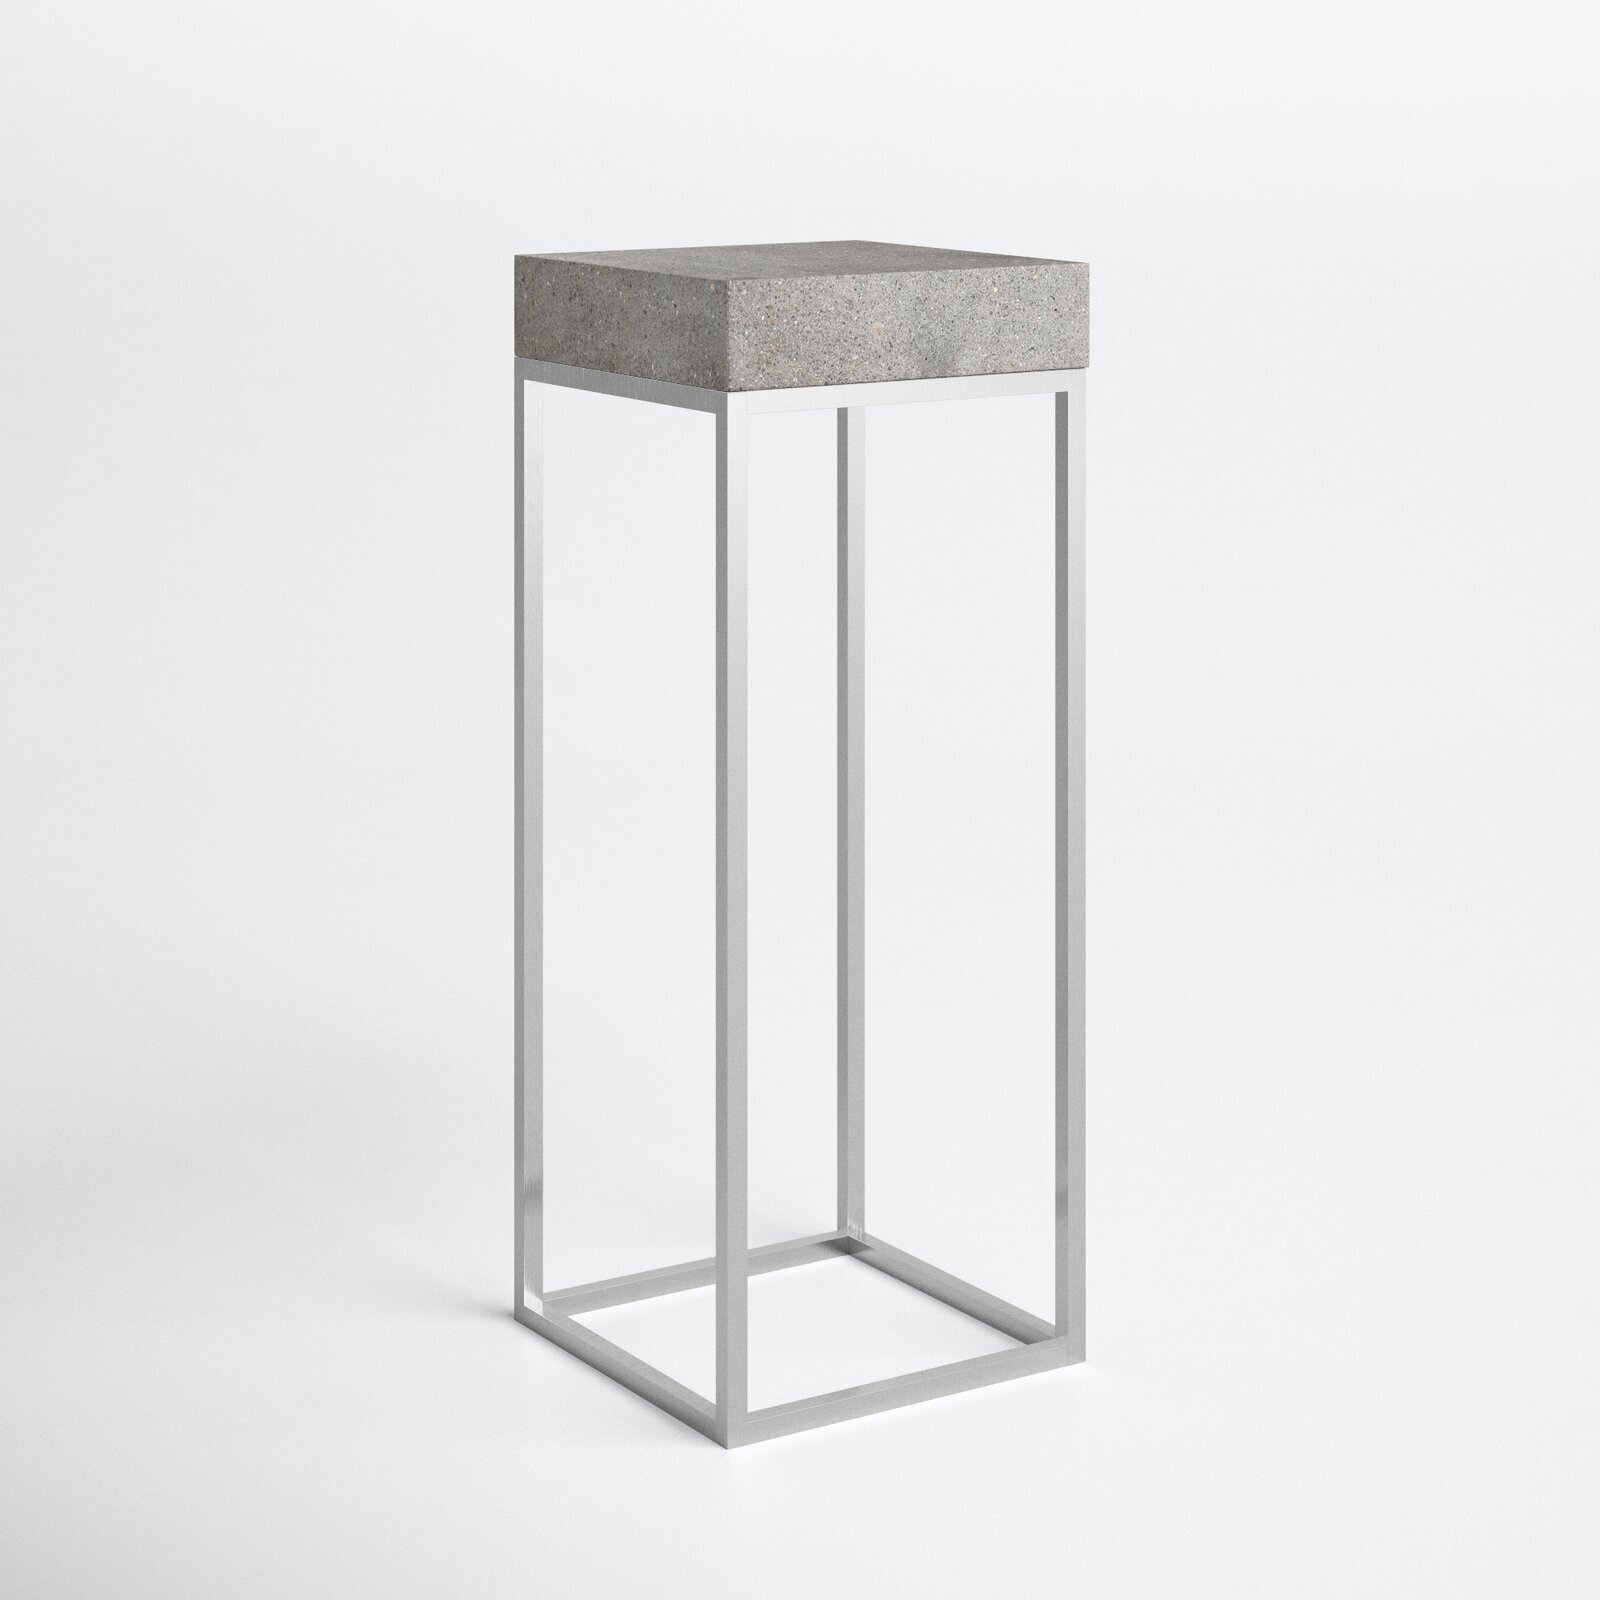 Tall Square Open Pedestal Planter Table for Indoors